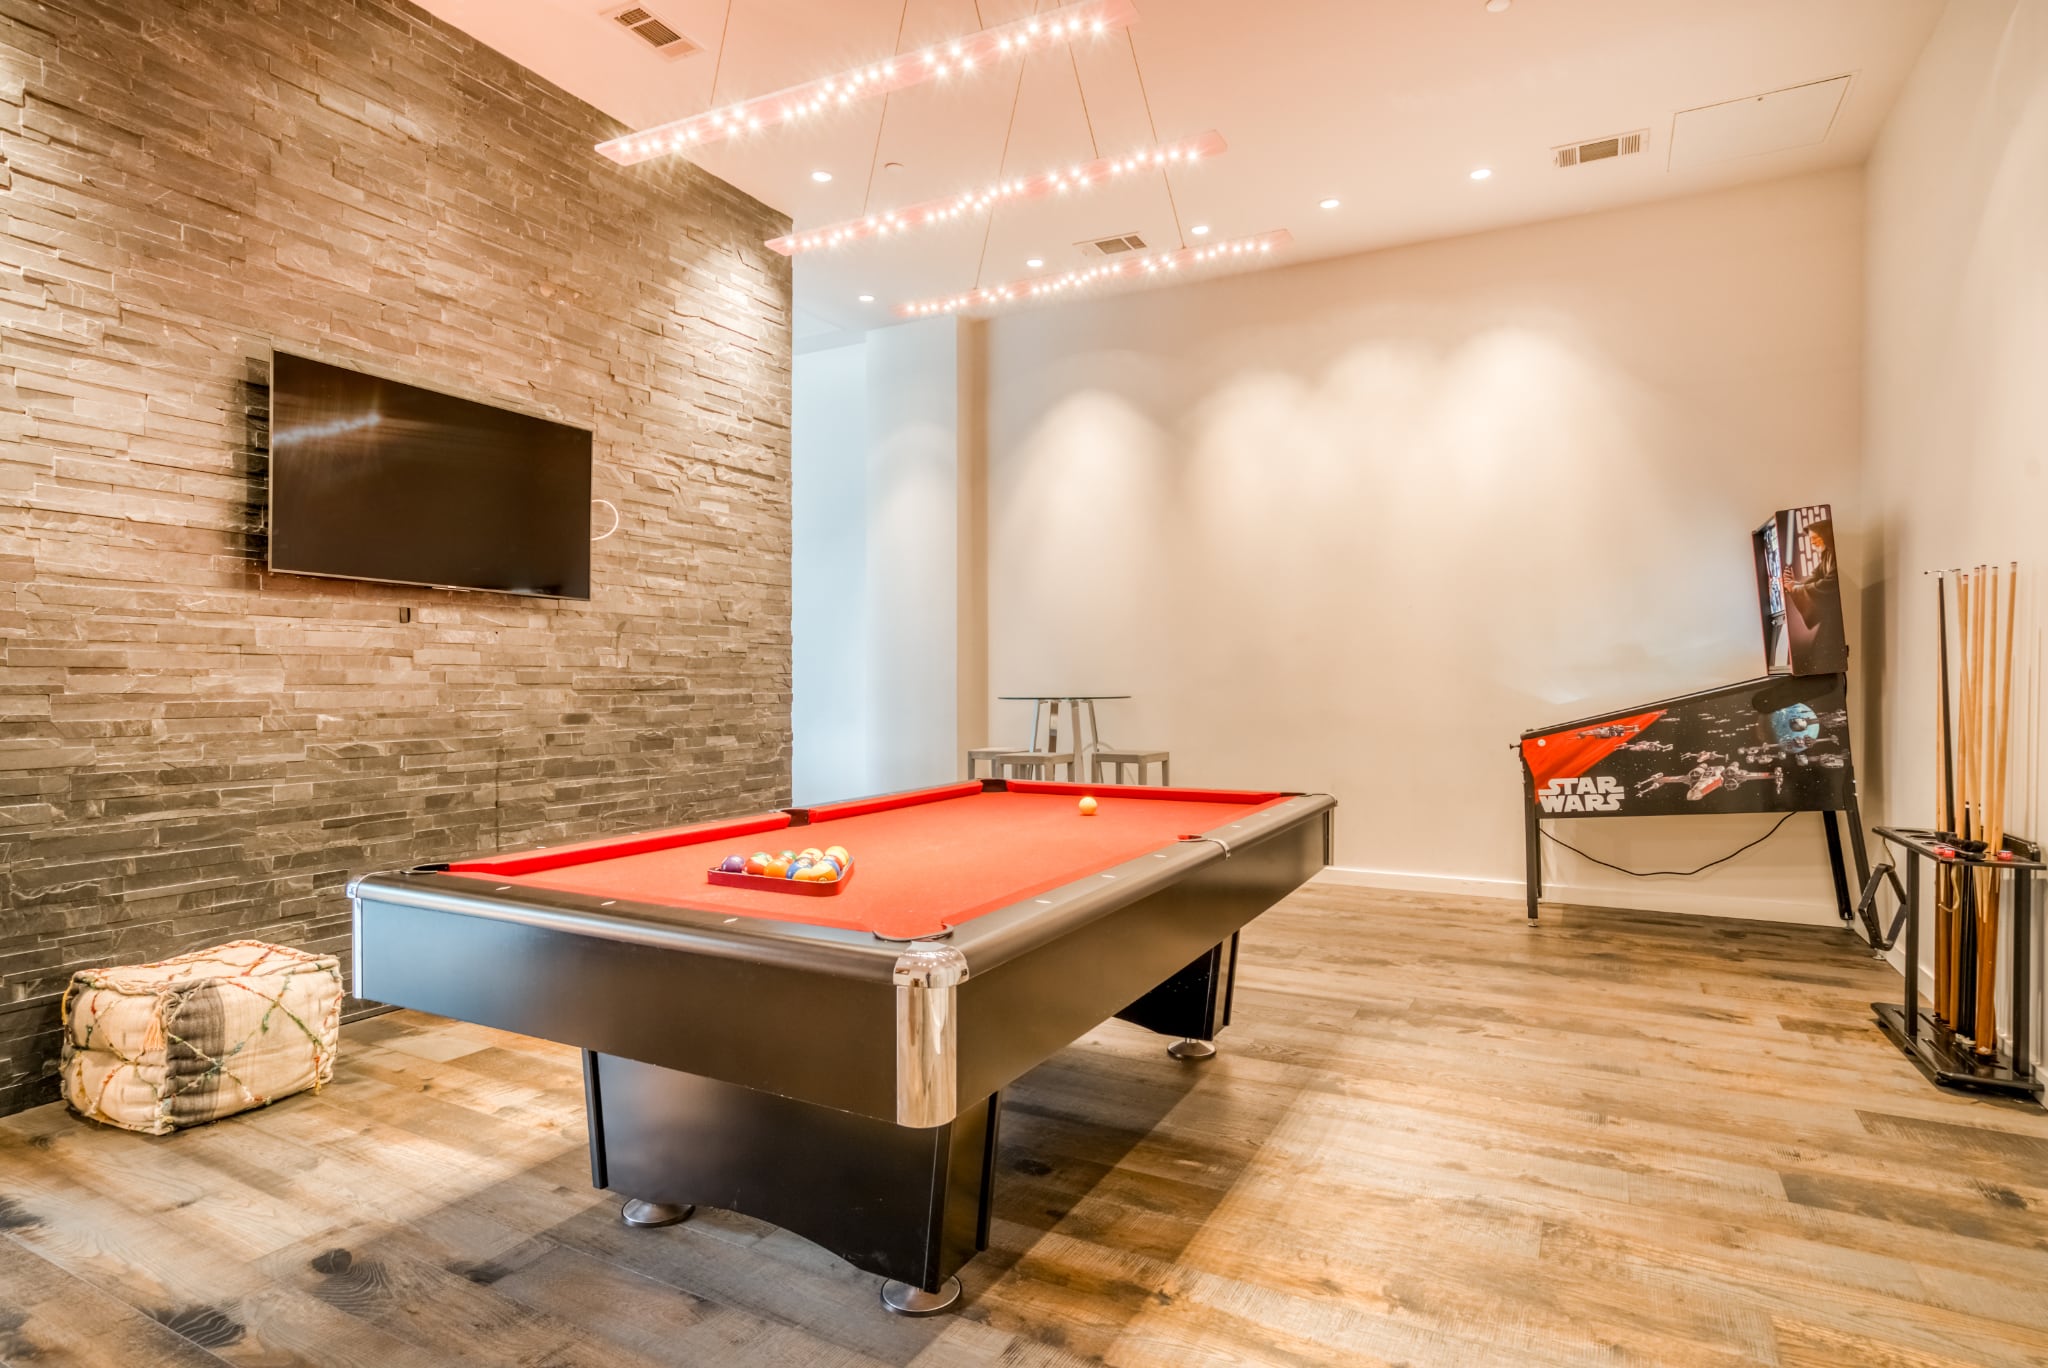 The residents' games room at Mid Main Lofts with a pool table and pinball machine